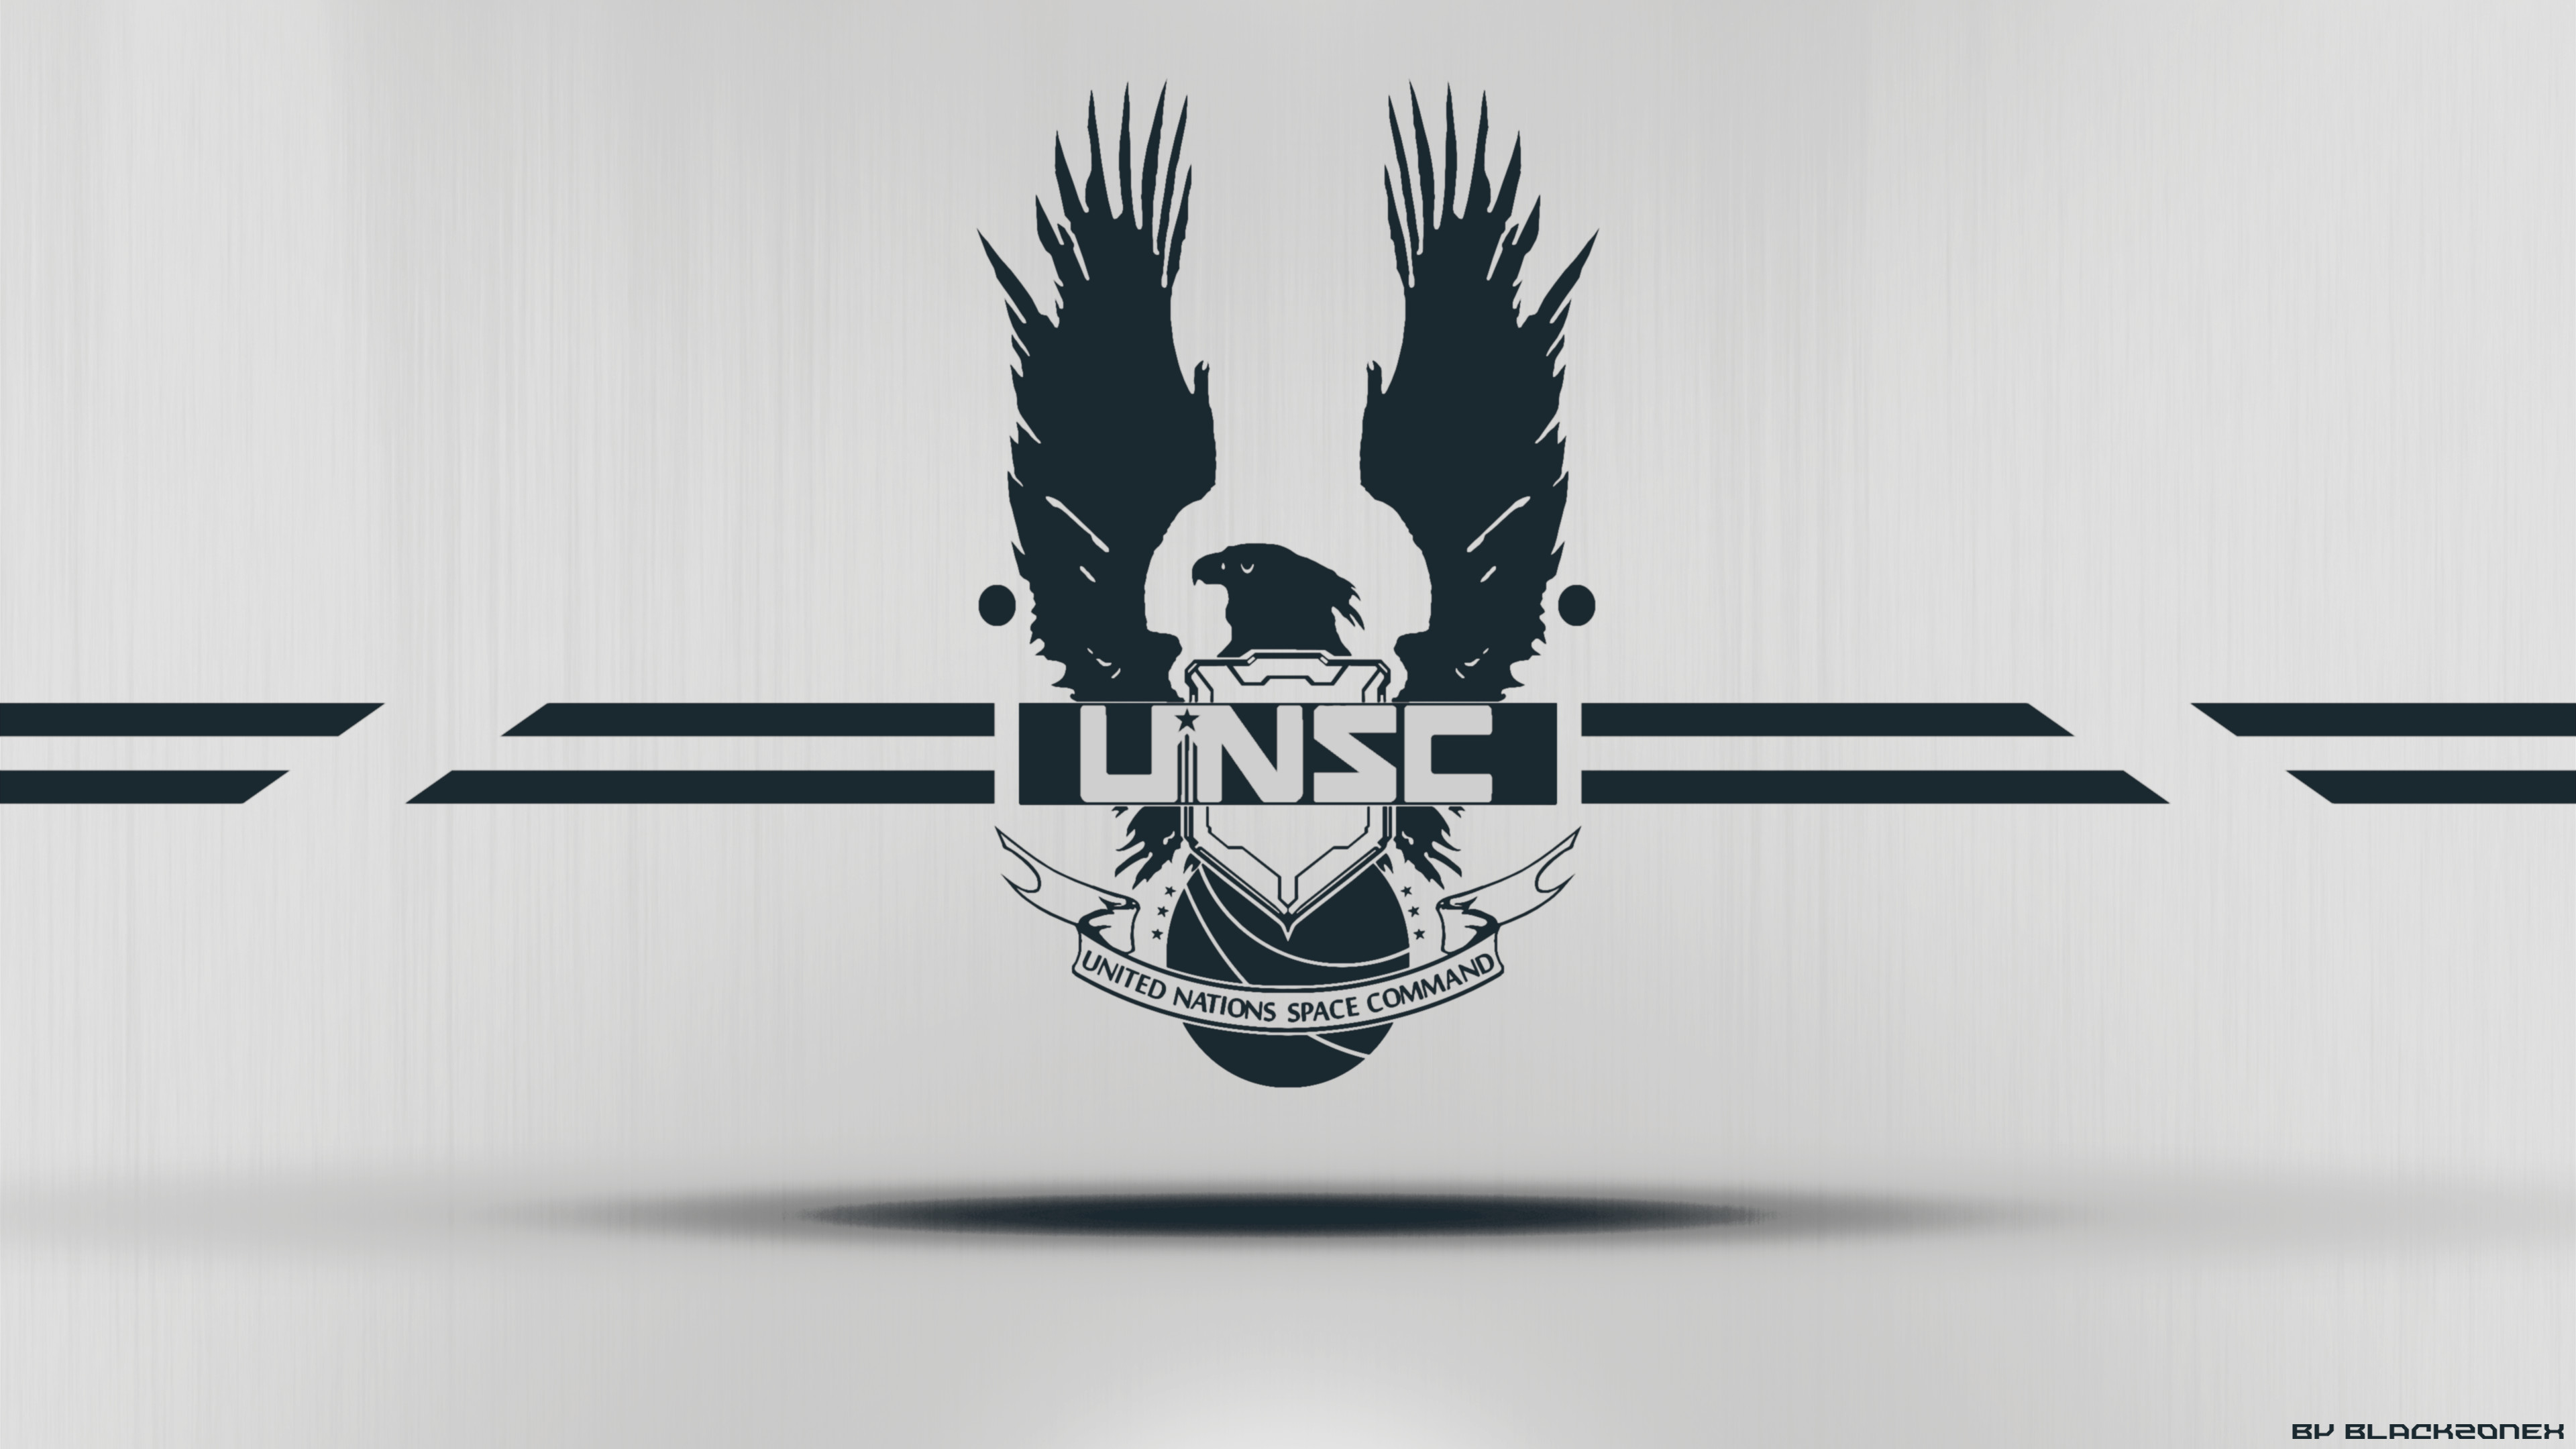 UNSC Wallpaper made by me.